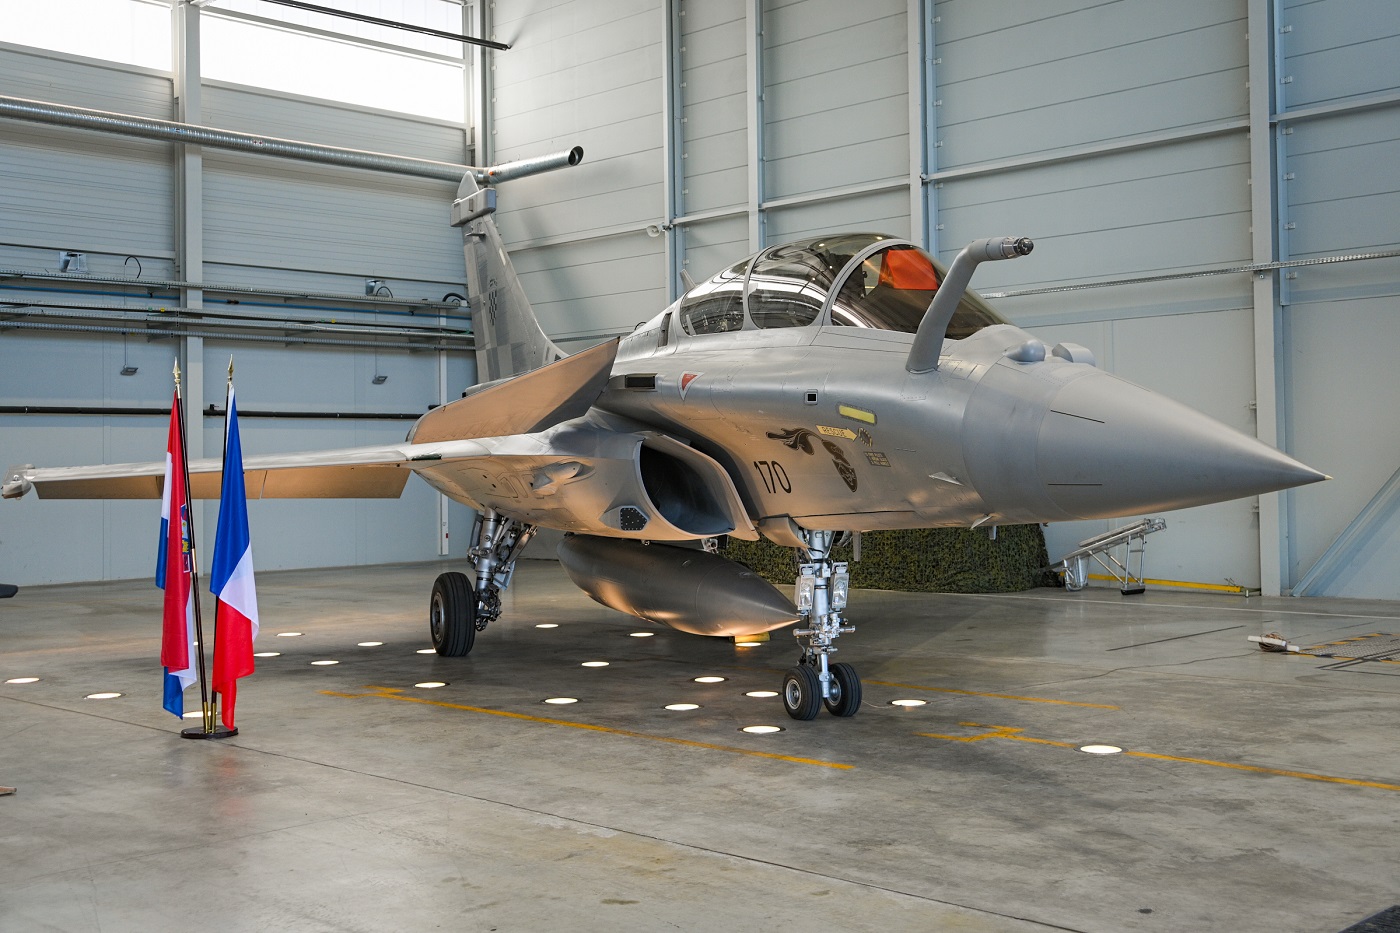 Croatian Air Force to Take Delivery of First Dassault Rafale Multirole Fighter